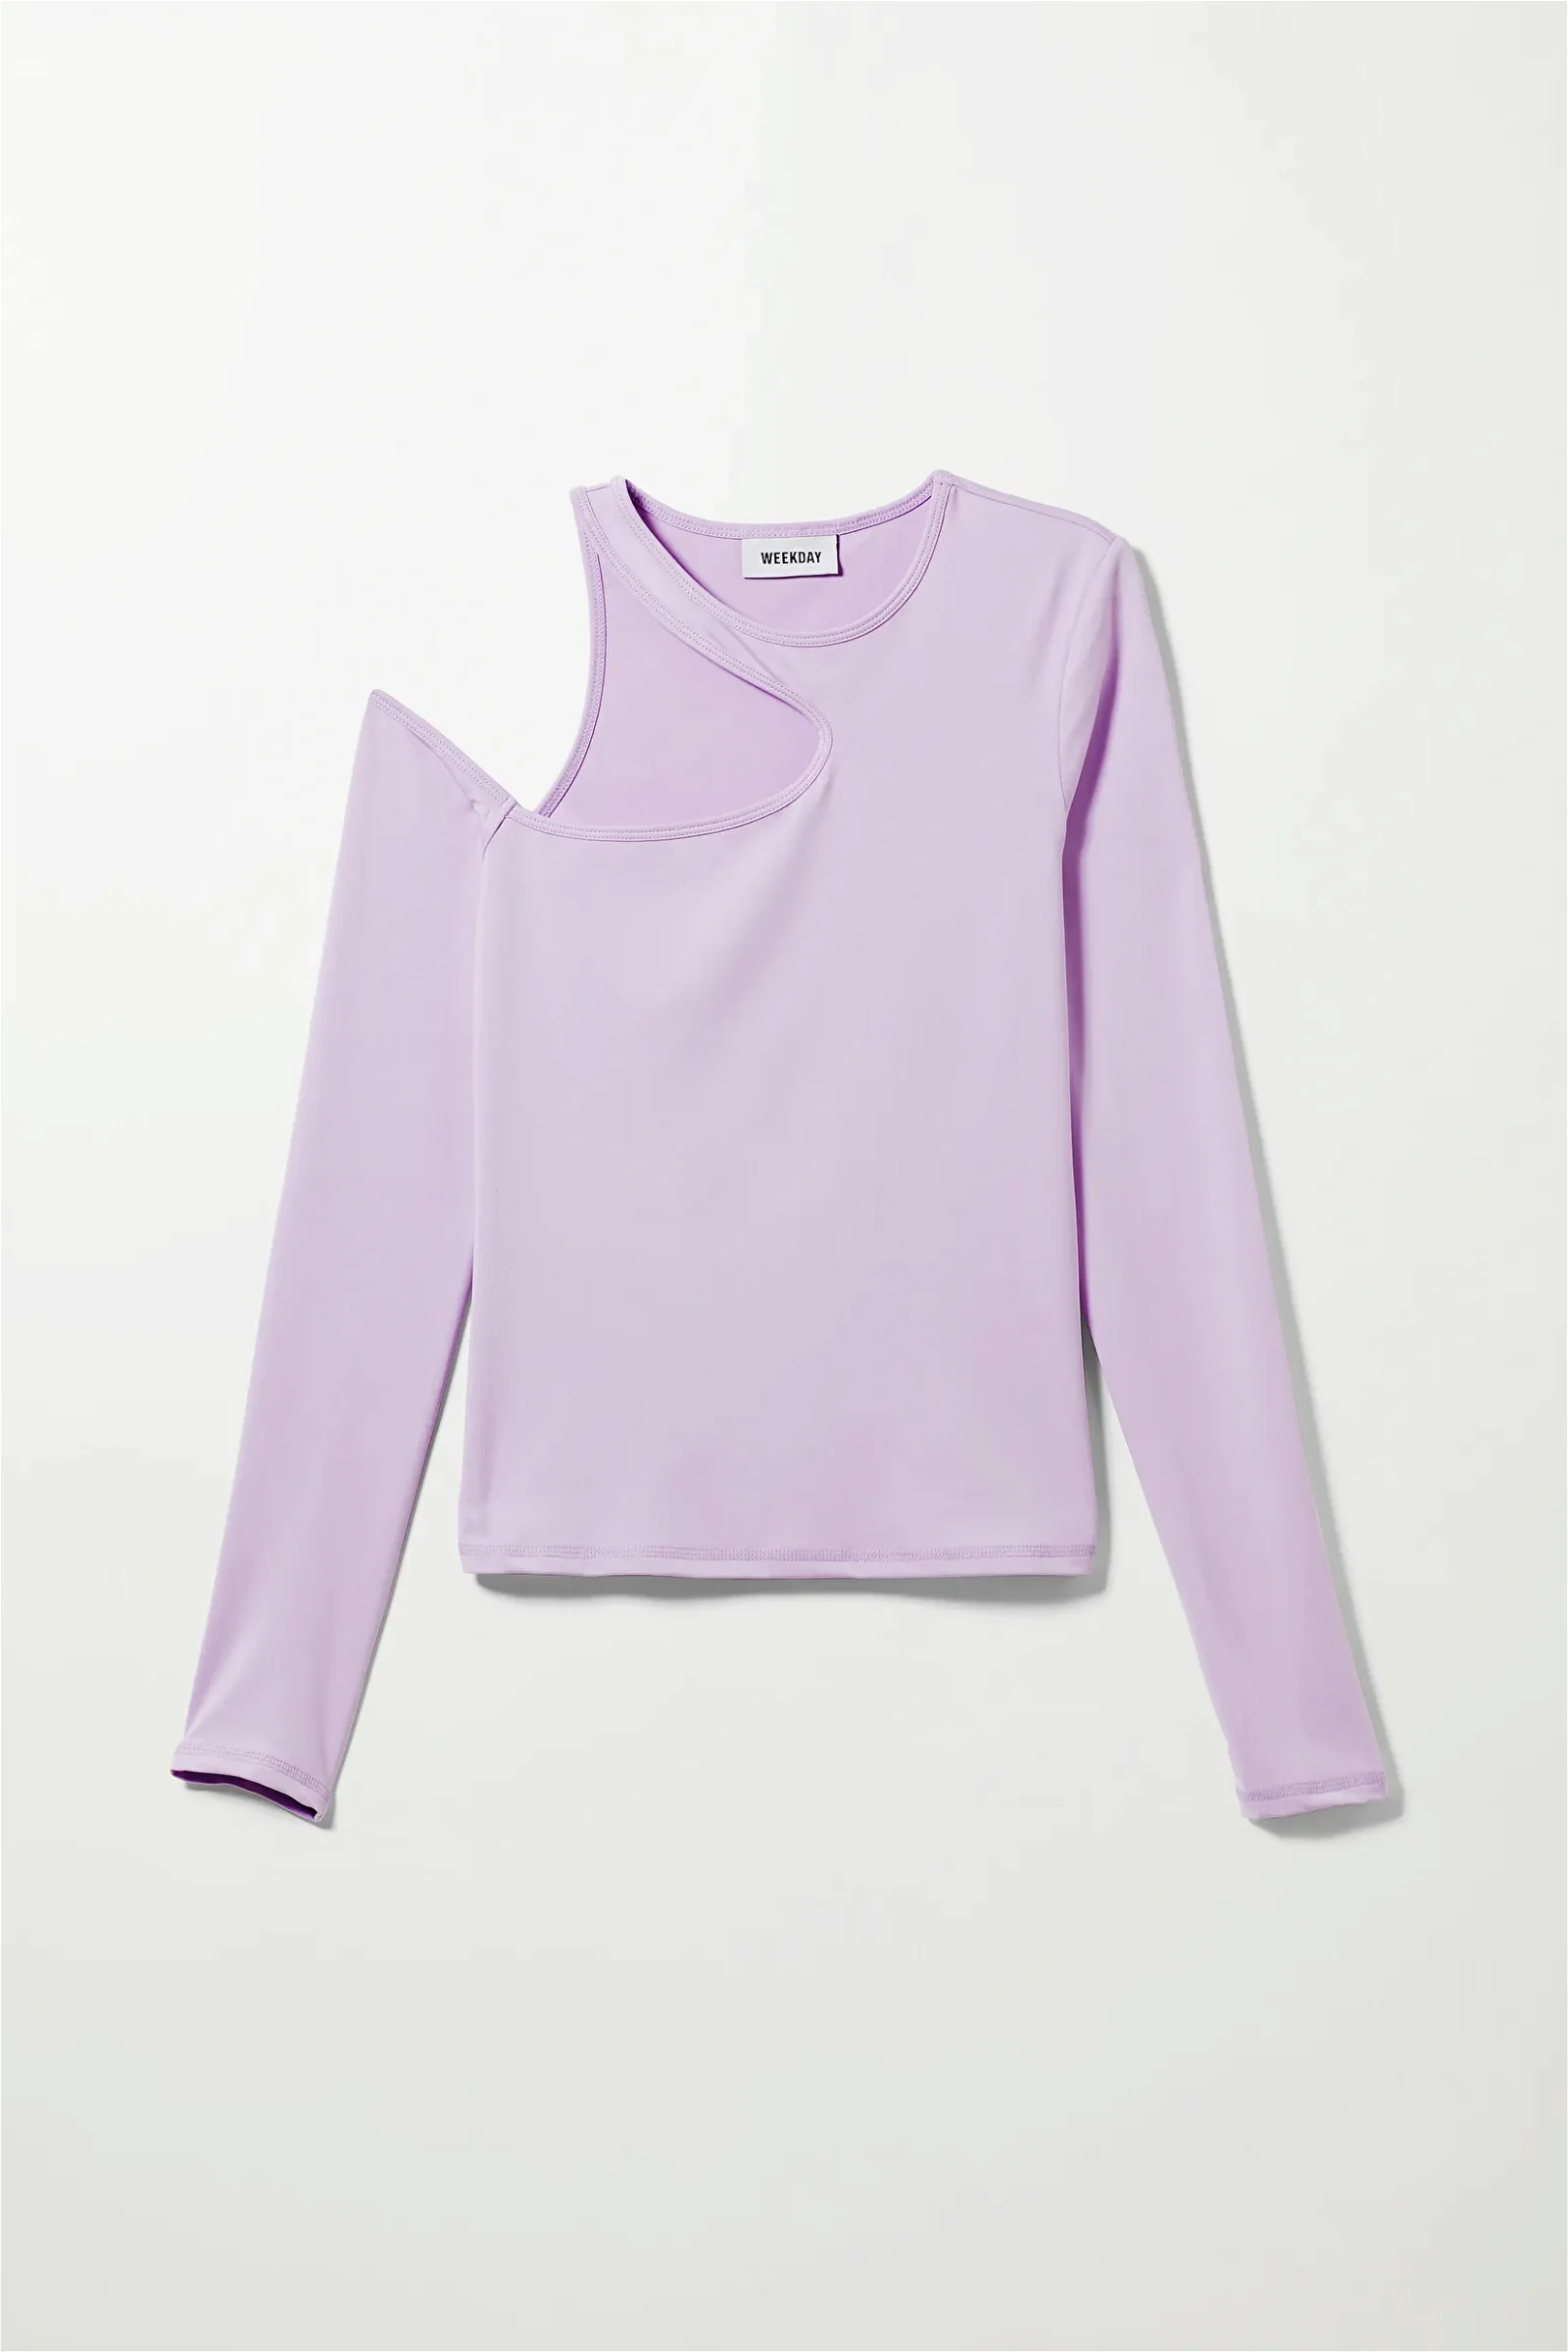 WEEKDAY Ambria Long Sleeve in Lilac | Endource